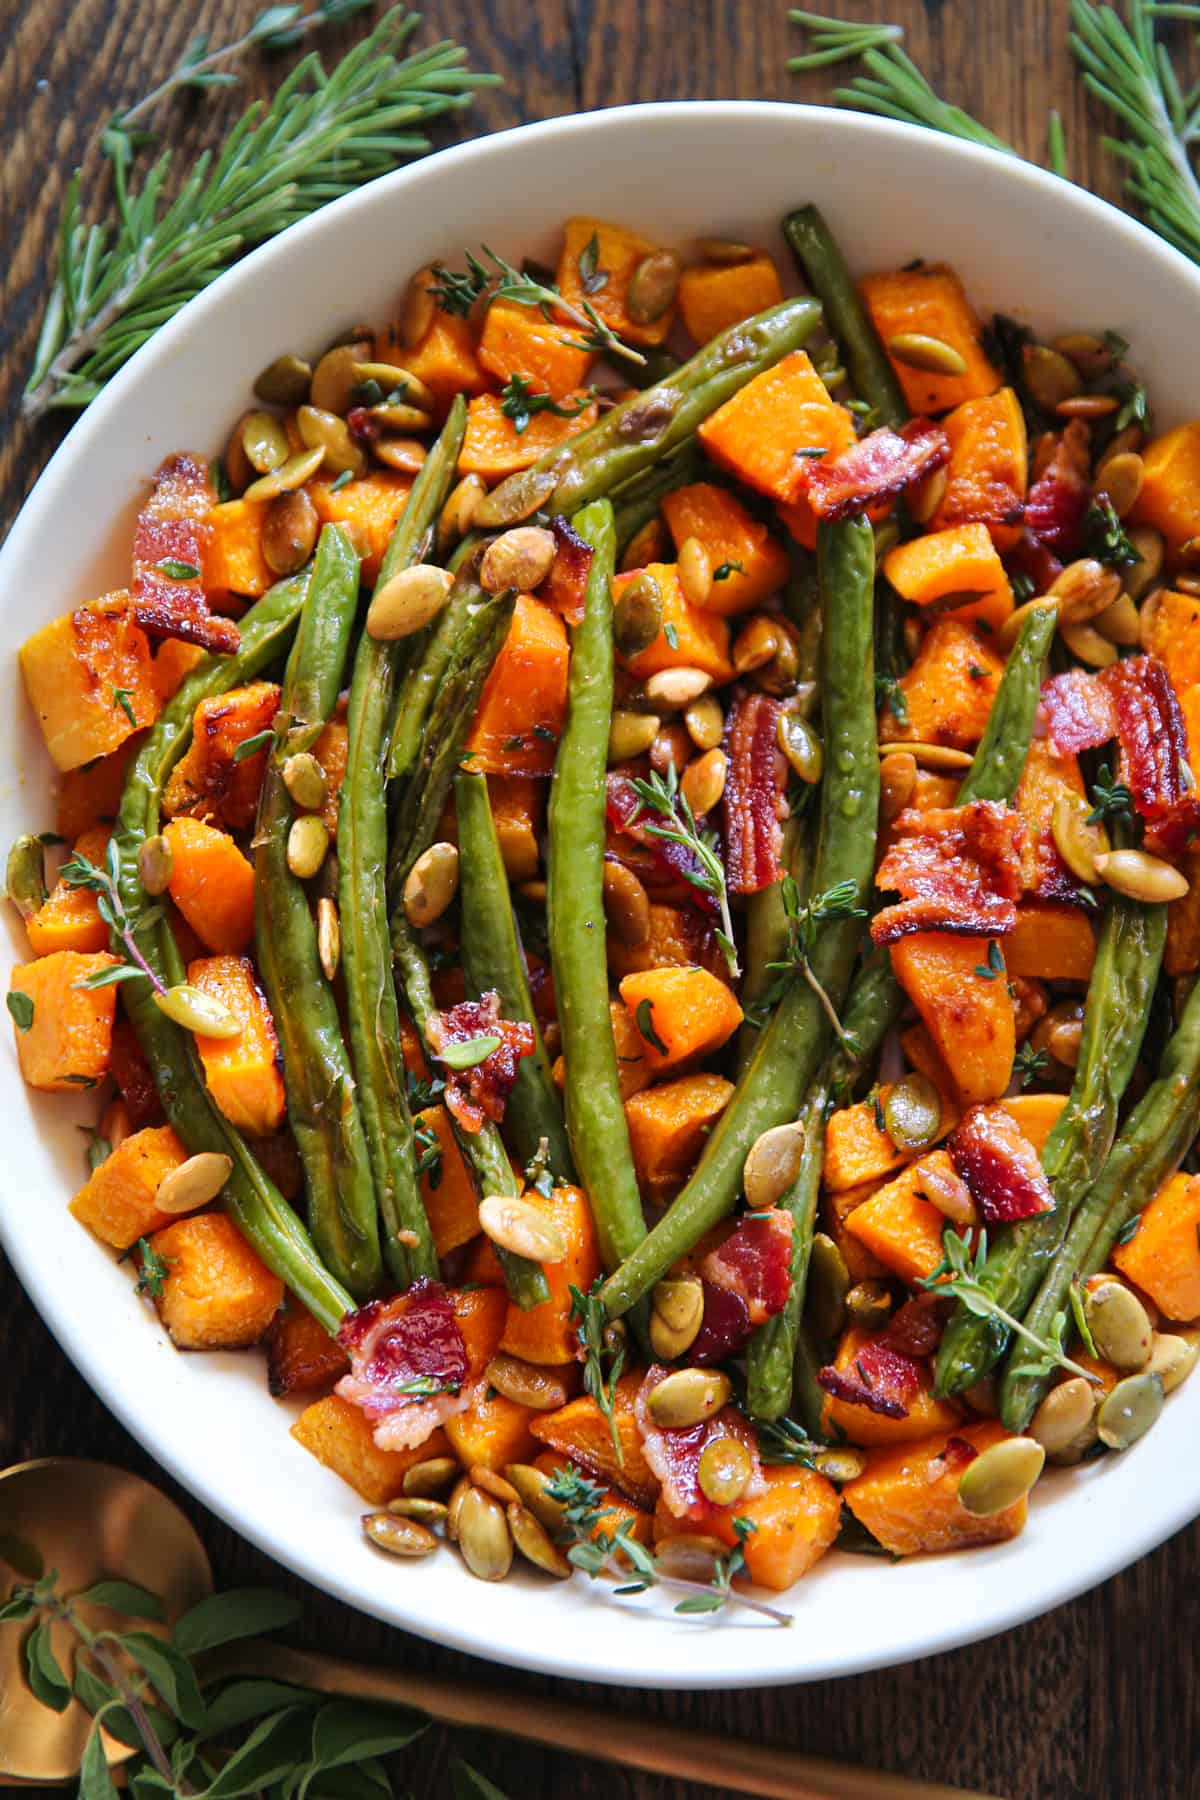 Thanksgiving Roasted Vegetables (Butternut Squash and Green Beans) with Bacon and Pumpkin Seeds in a white bowl.